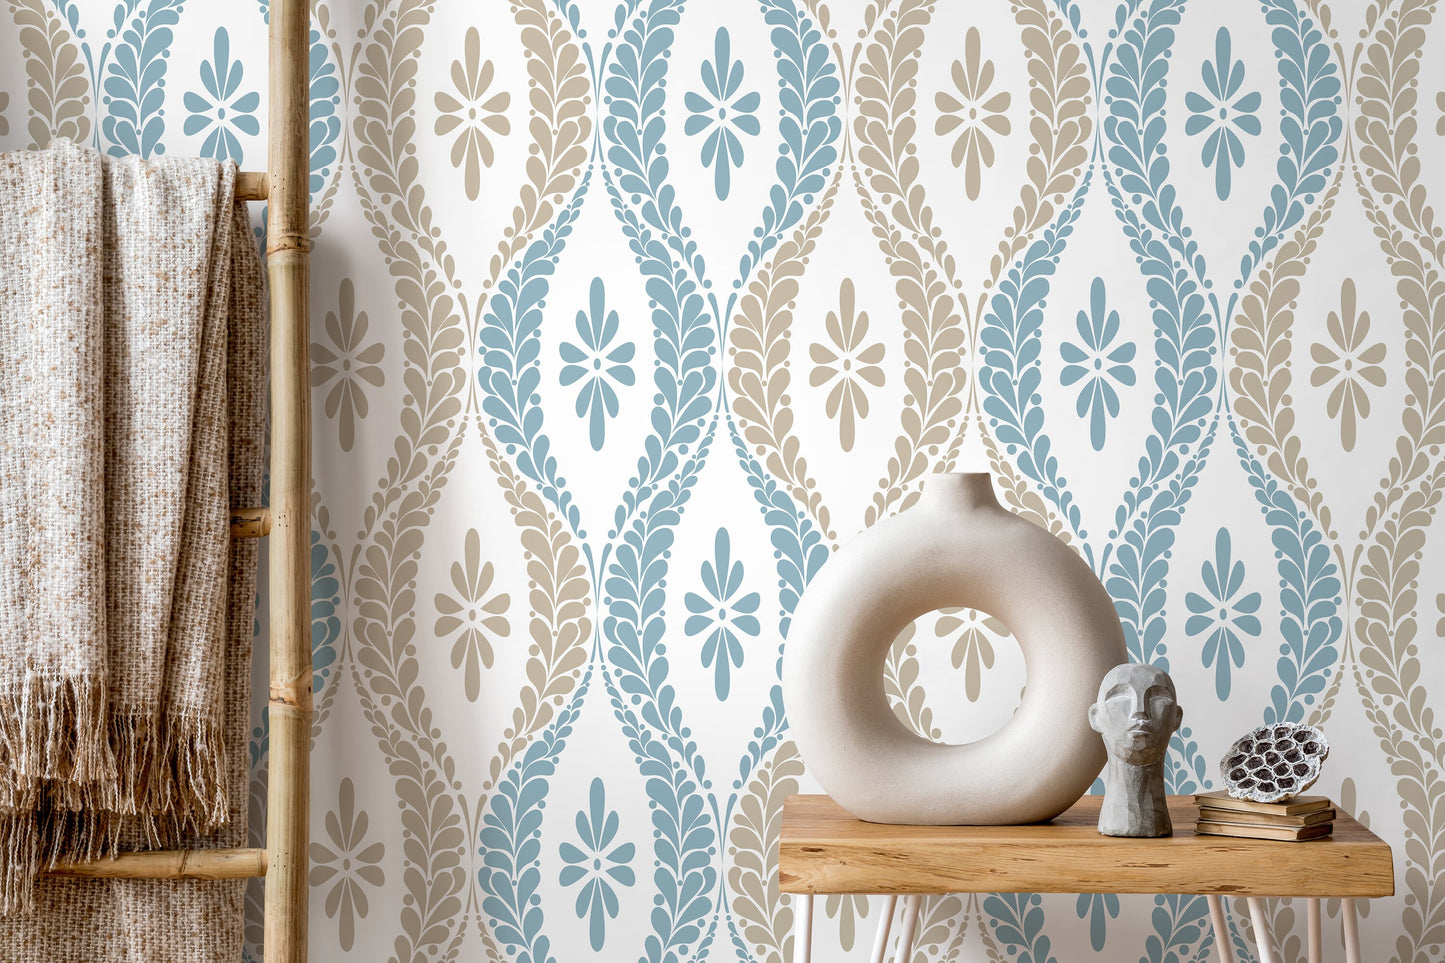 Blue and Beige Vintage Wallpaper / Peel and Stick Wallpaper Removable Wallpaper Home Decor Wall Art Wall Decor Room Decor - D172